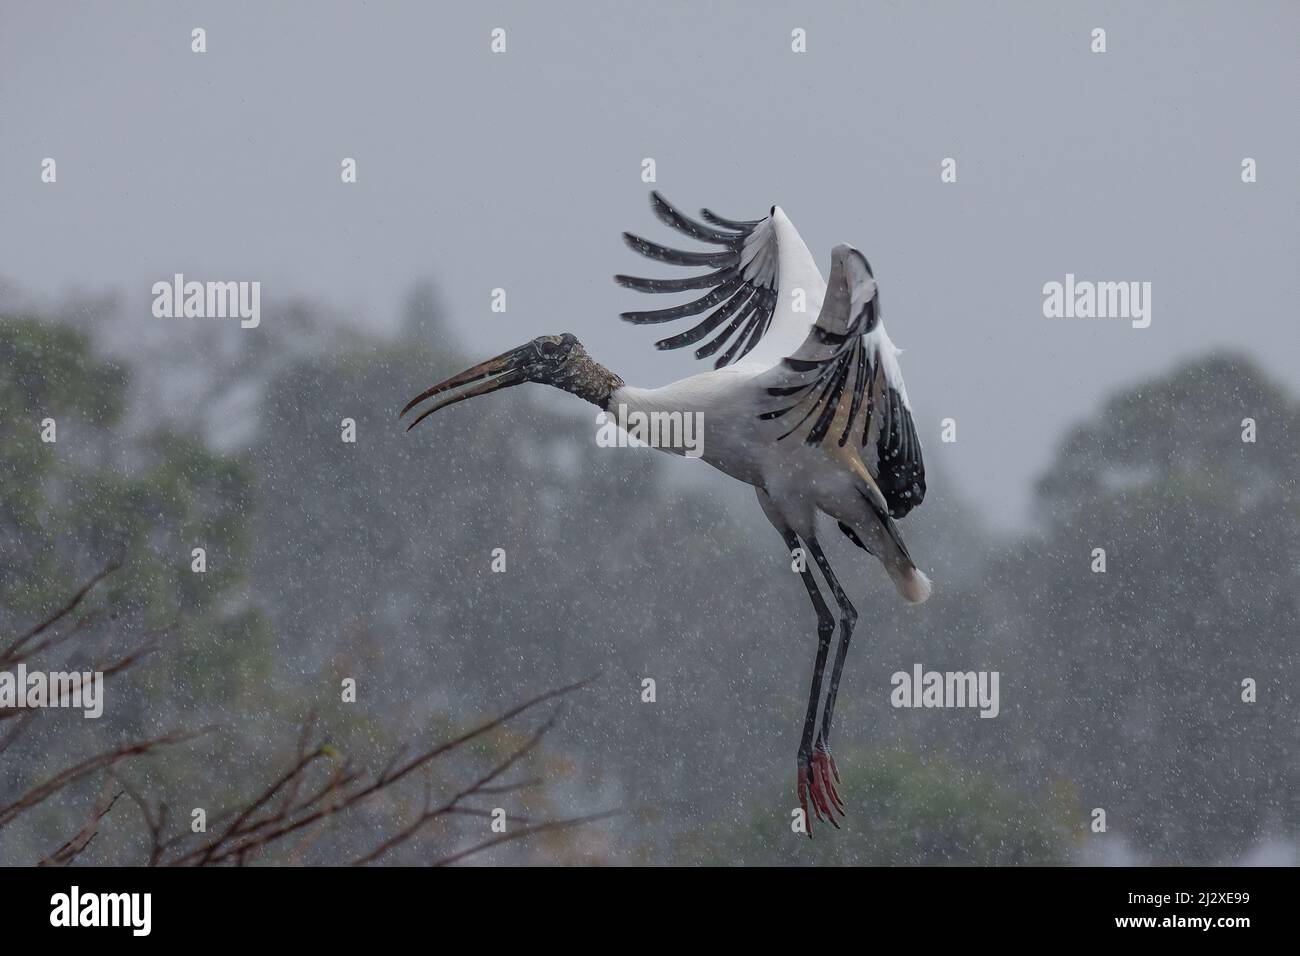 A wood stork comes in for a landing in the pouring rain in the Florida Everglades. Stock Photo